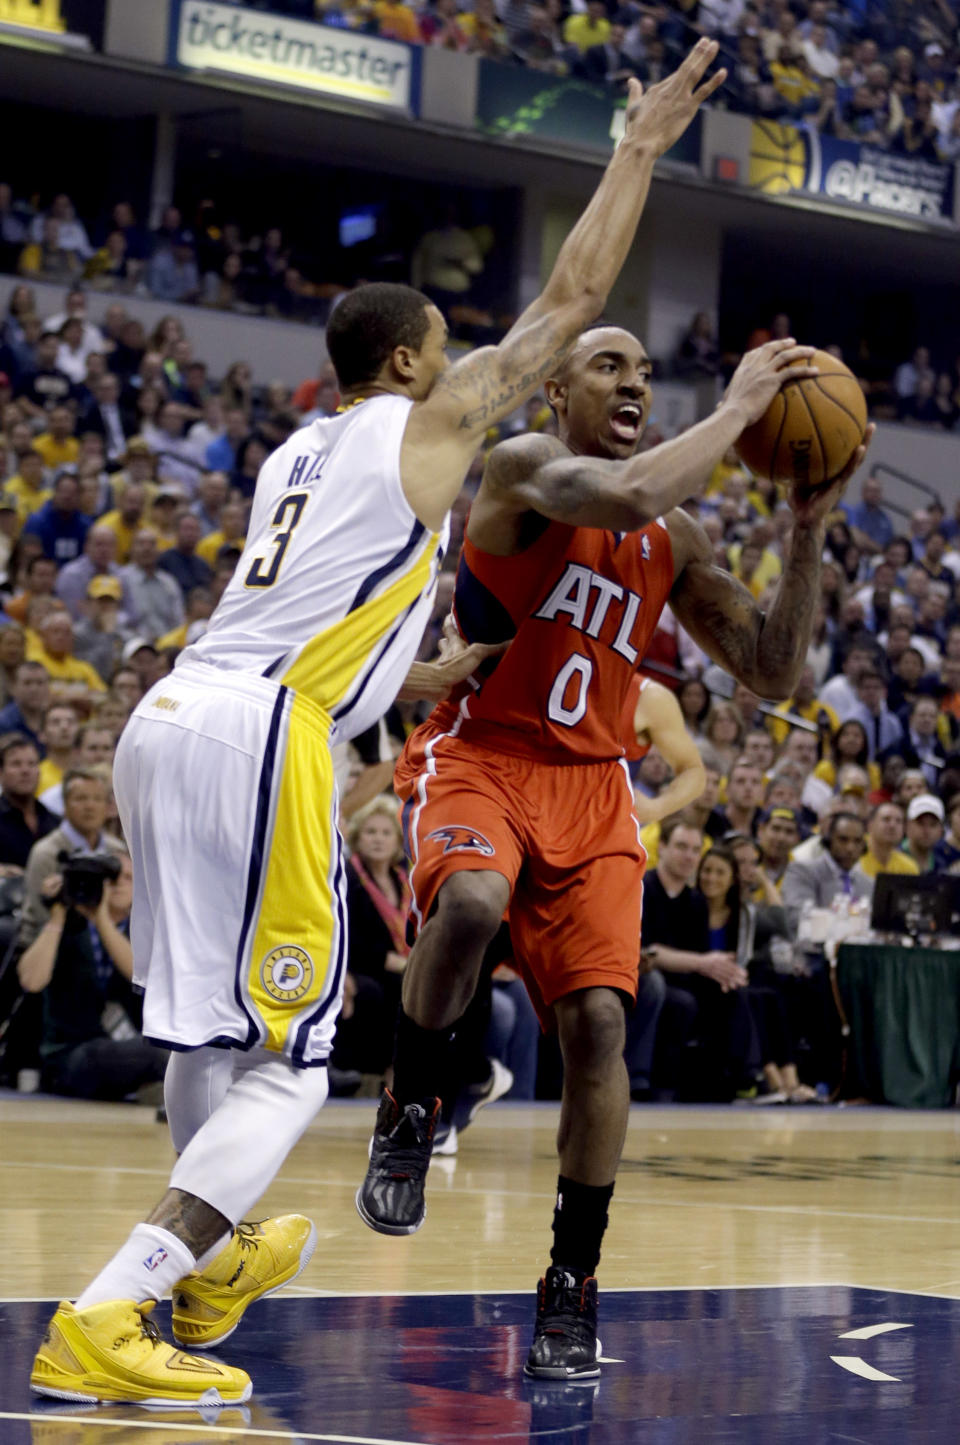 Atlanta Hawks' Jeff Teague (0) drives toward the basket as Indiana Pacers' George Hill (3) defends during the first half in Game 5 of an opening-round NBA basketball playoff series Monday, April 28, 2014, in Indianapolis. (AP Photo/Darron Cummings)